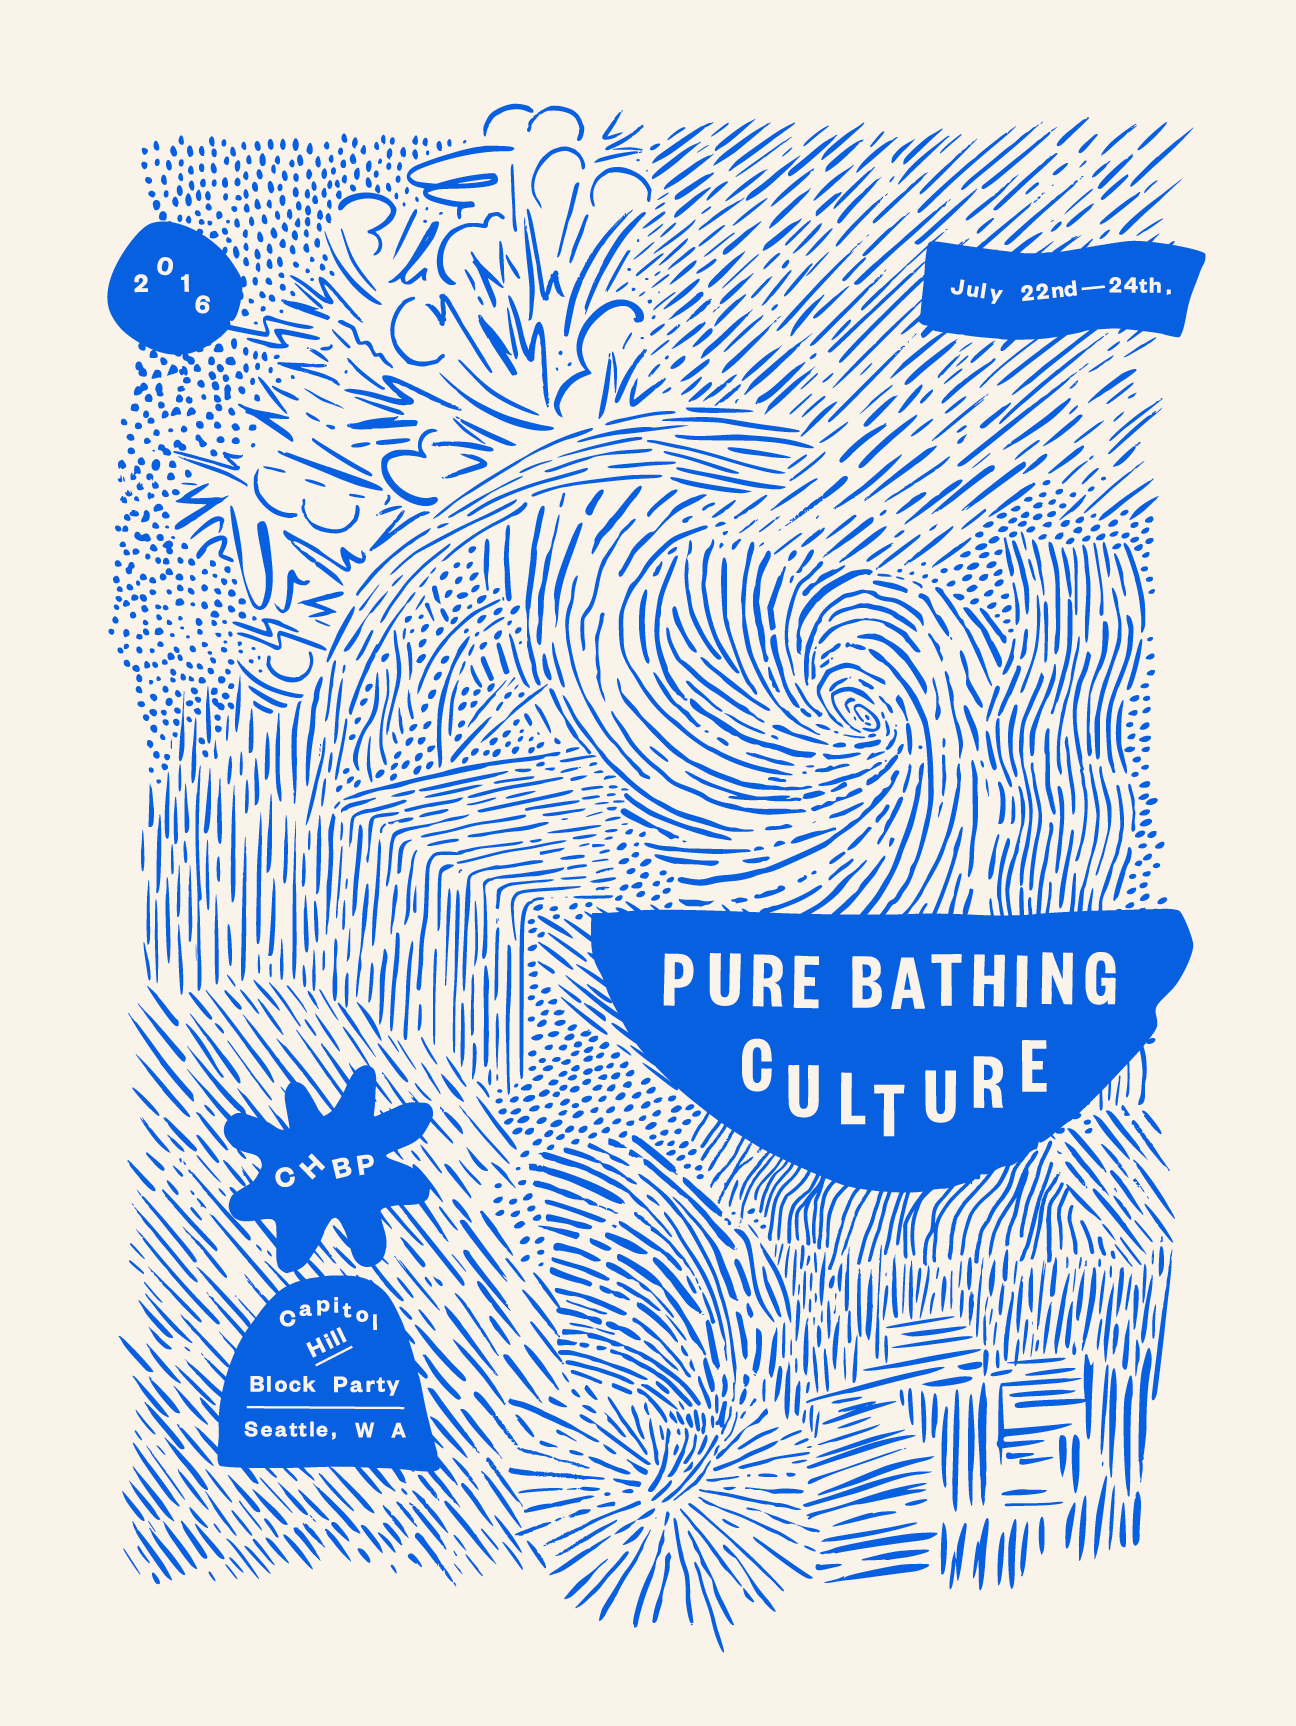 Pure bathing culture show poster